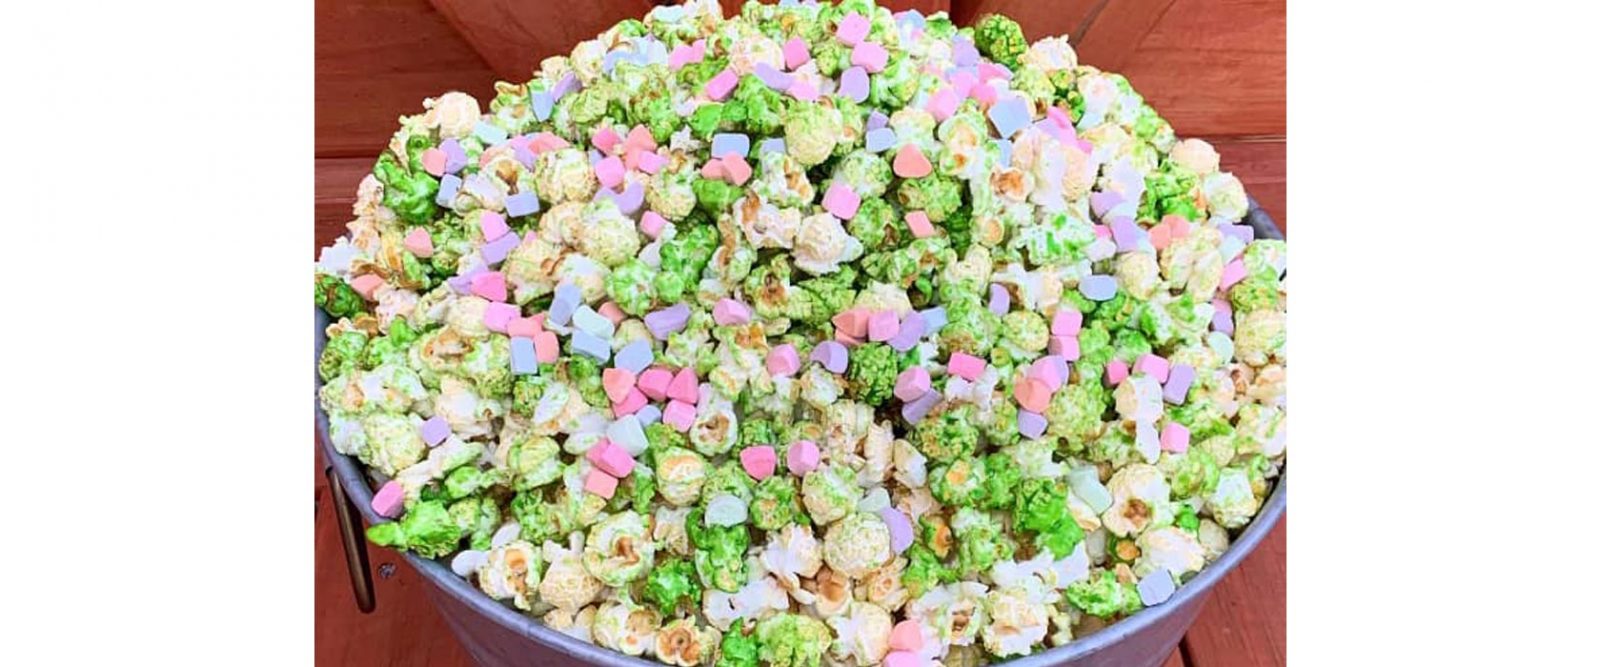 Pastel-colored popcorn in bucket with multi-colored marshmallow bits